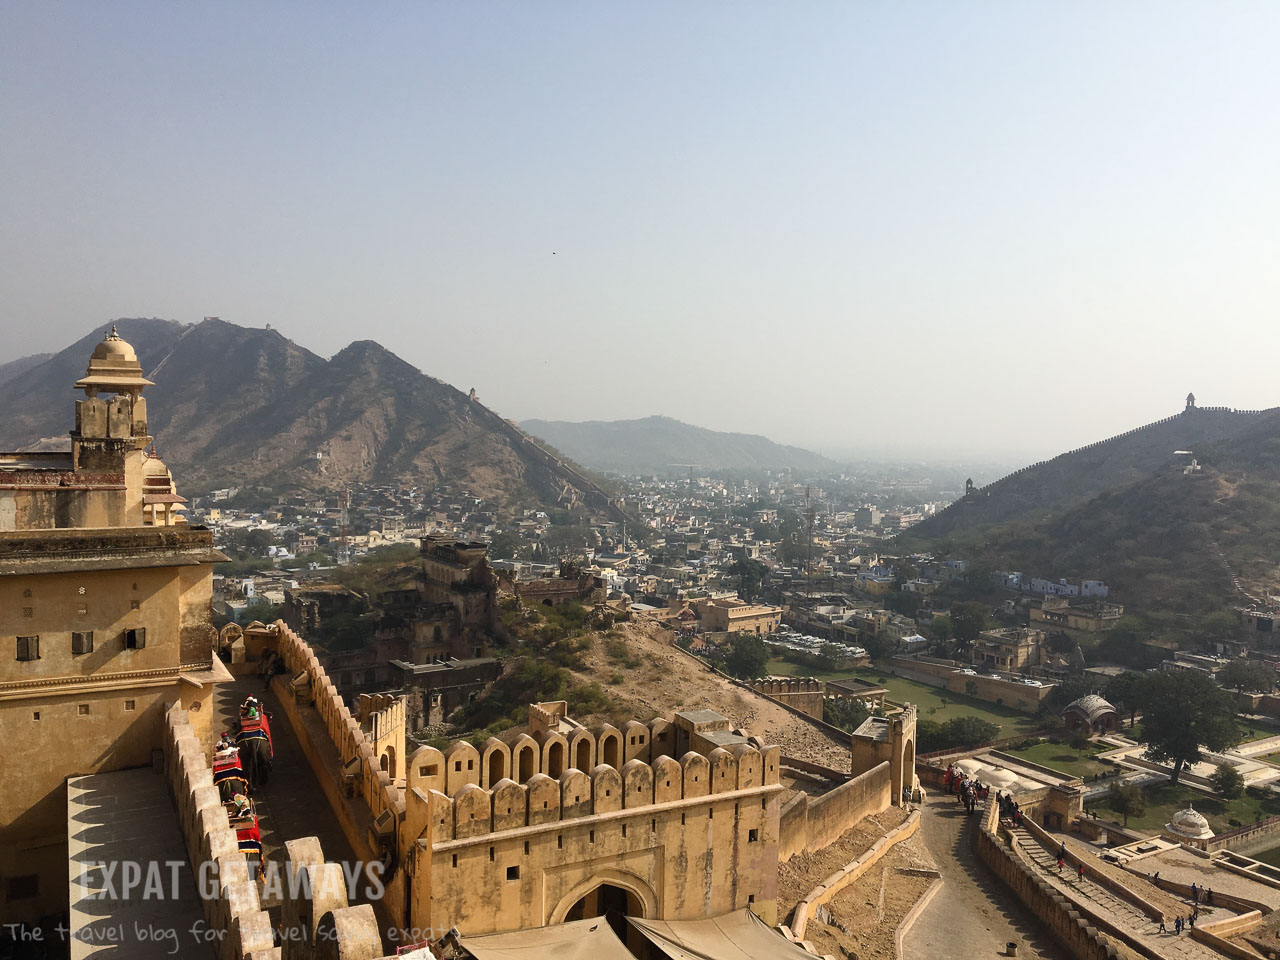 The Amber Fort, Jaipur was the highlight of our golden triangle tour. Expat Getaways, 5 Nights Golden Triangle, Delhi, Jaipur & Agra, India.